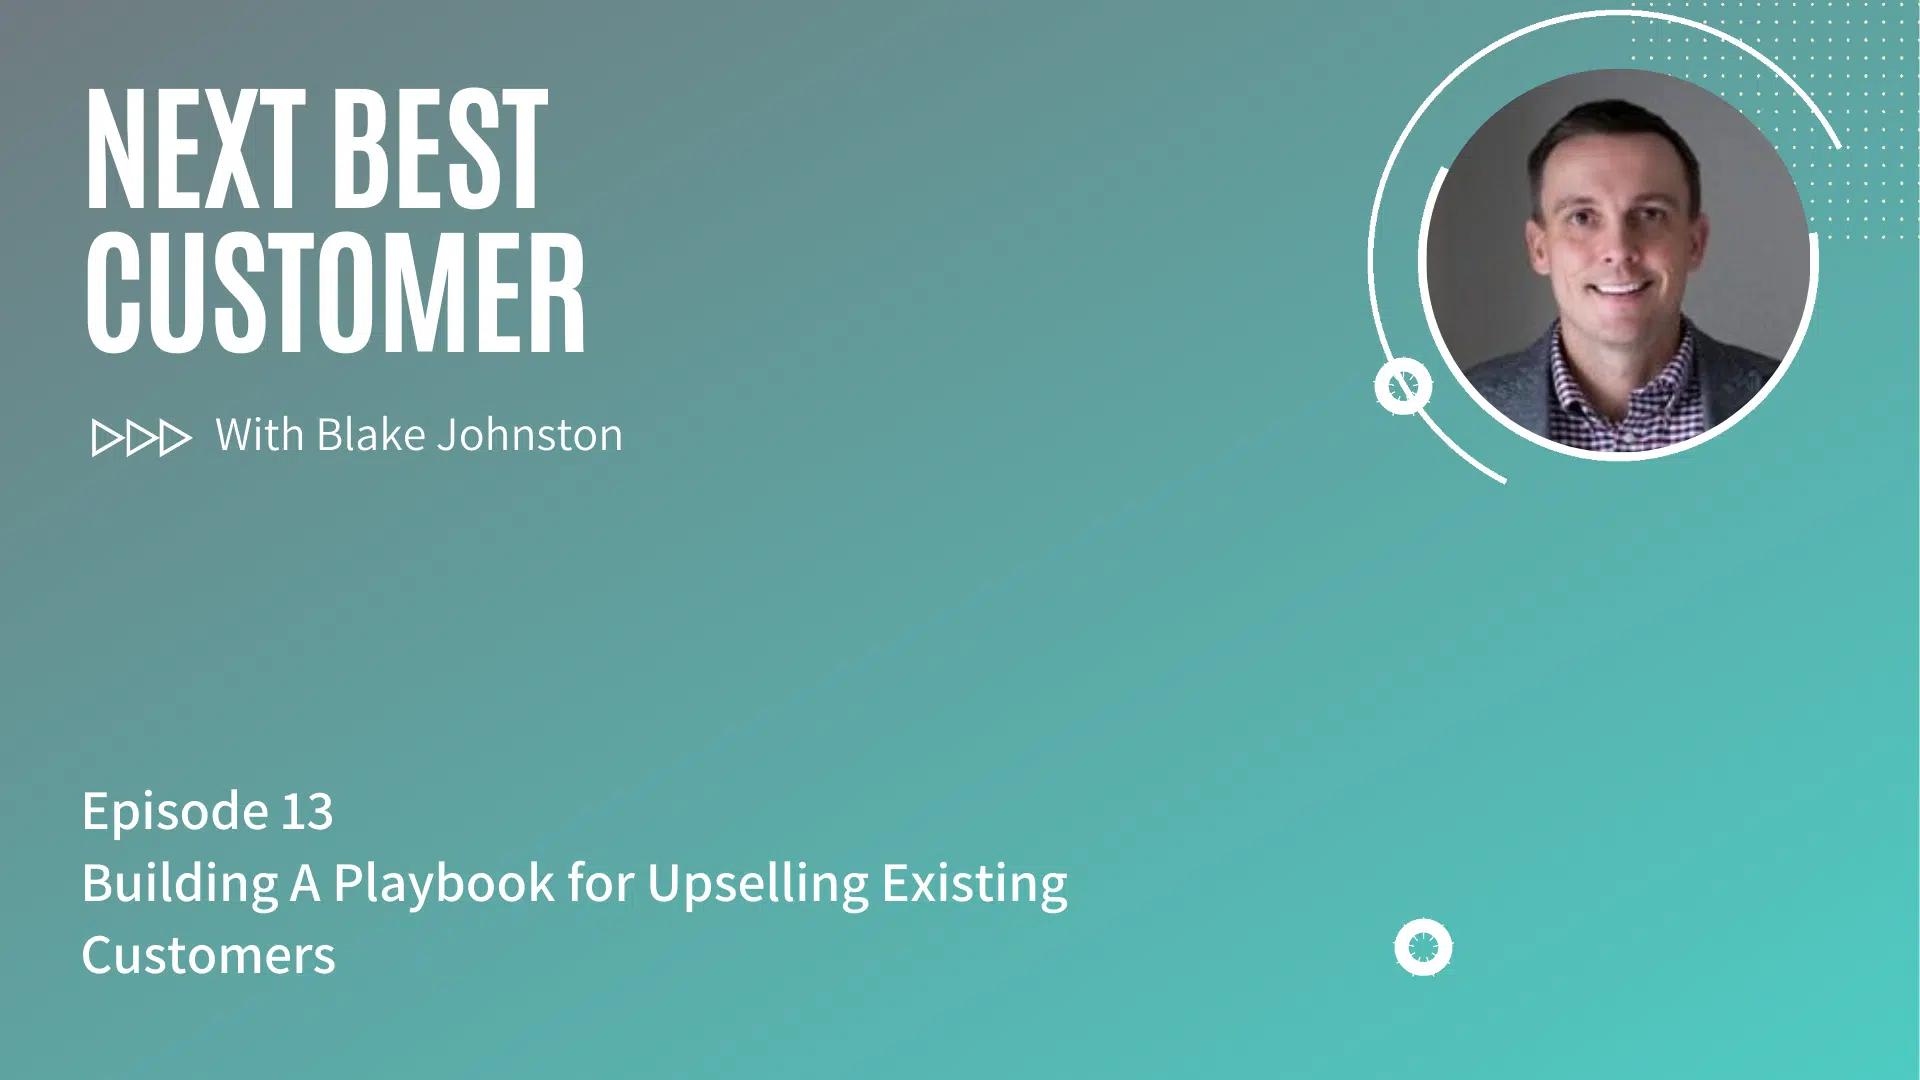 _Podcast Episode 13_ Building a Playbook for Upselling Existing Customers